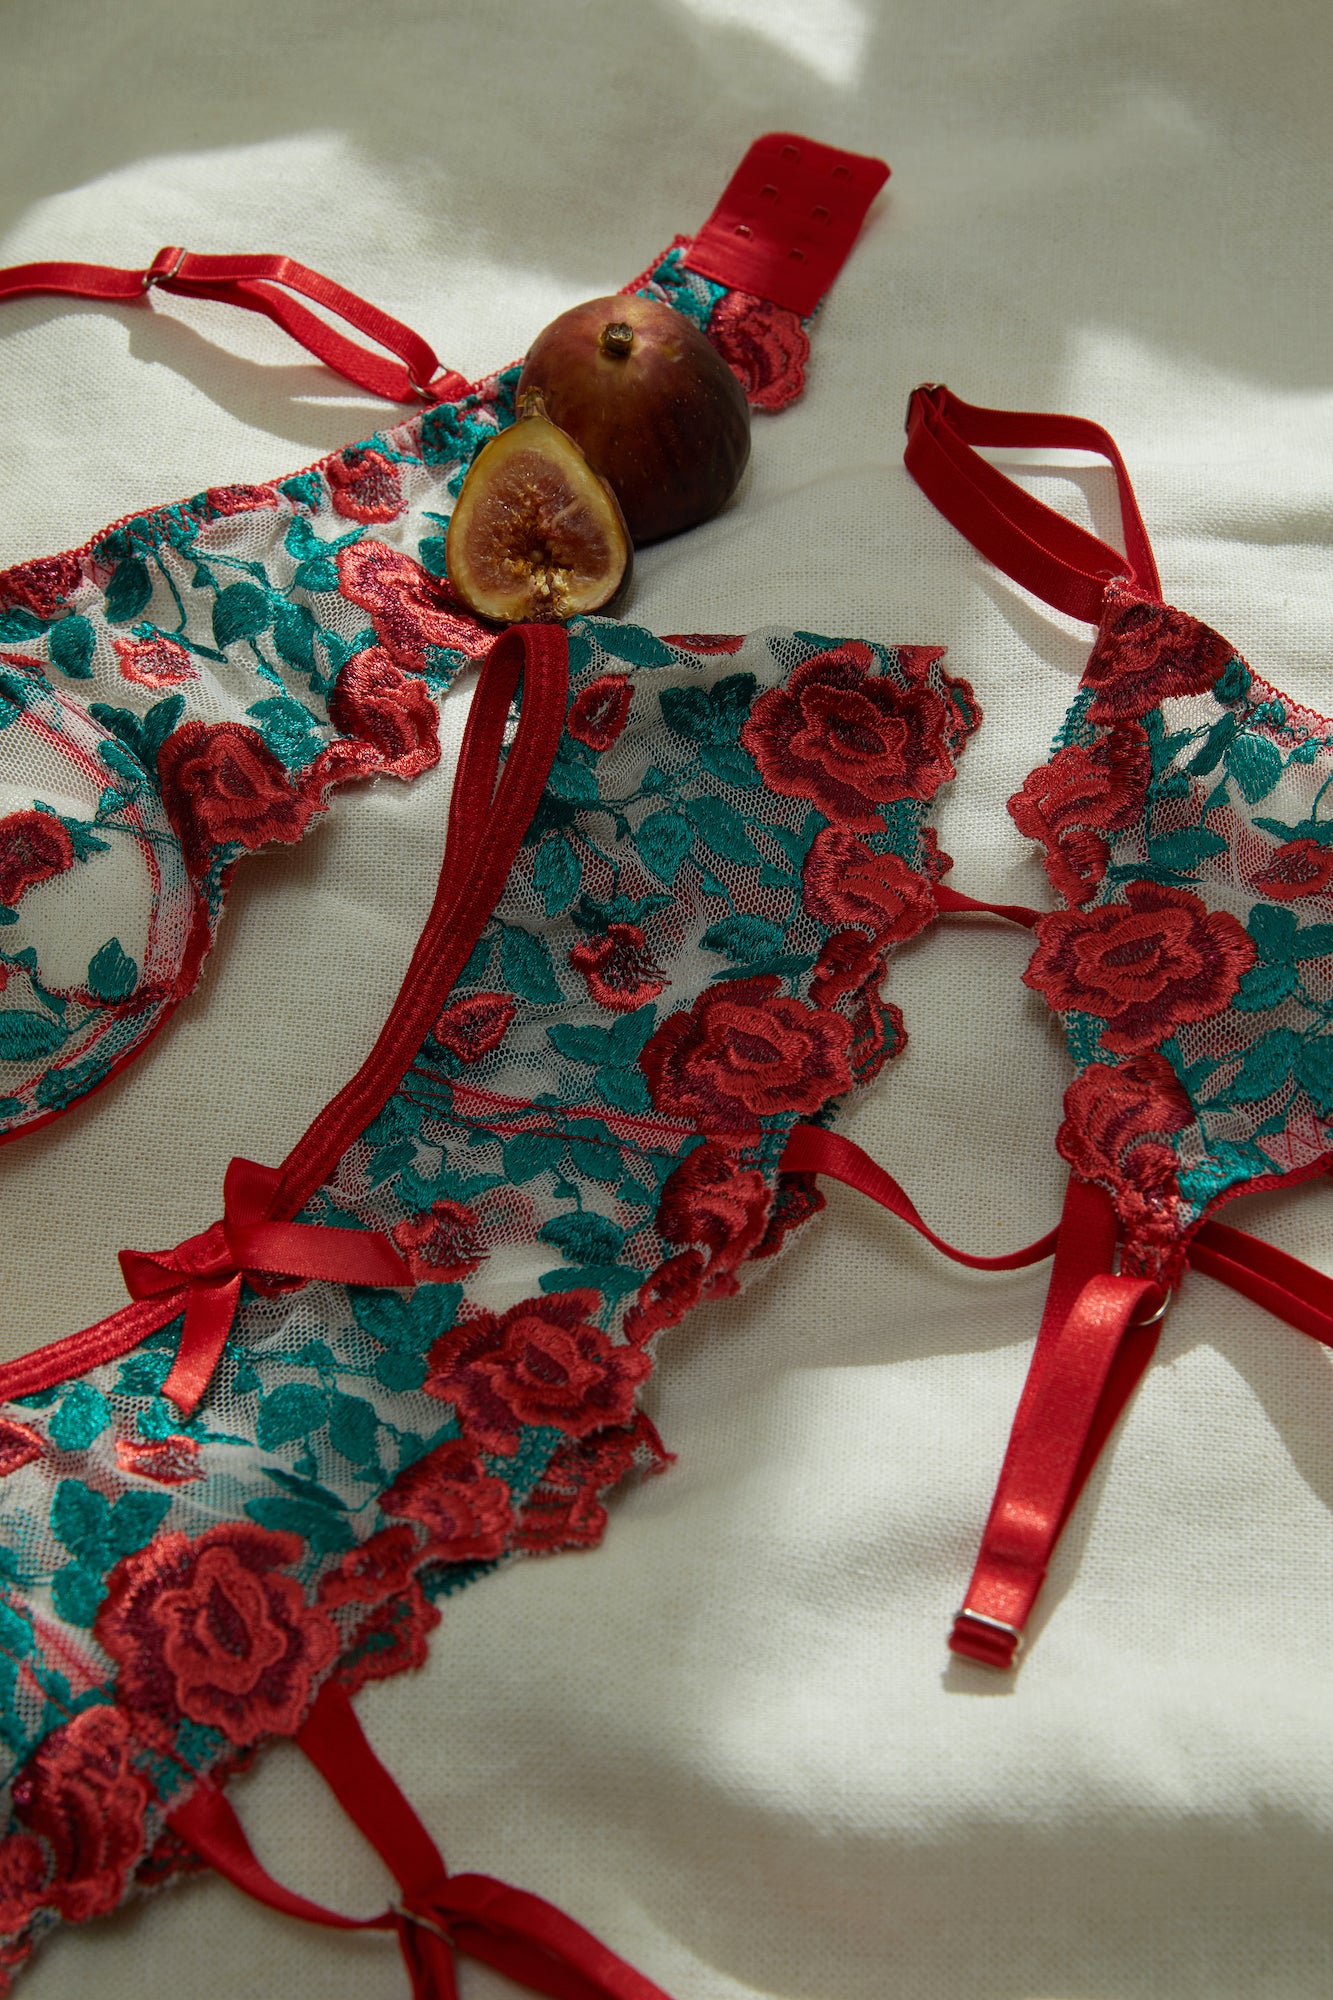 Red Lingerie with Roses